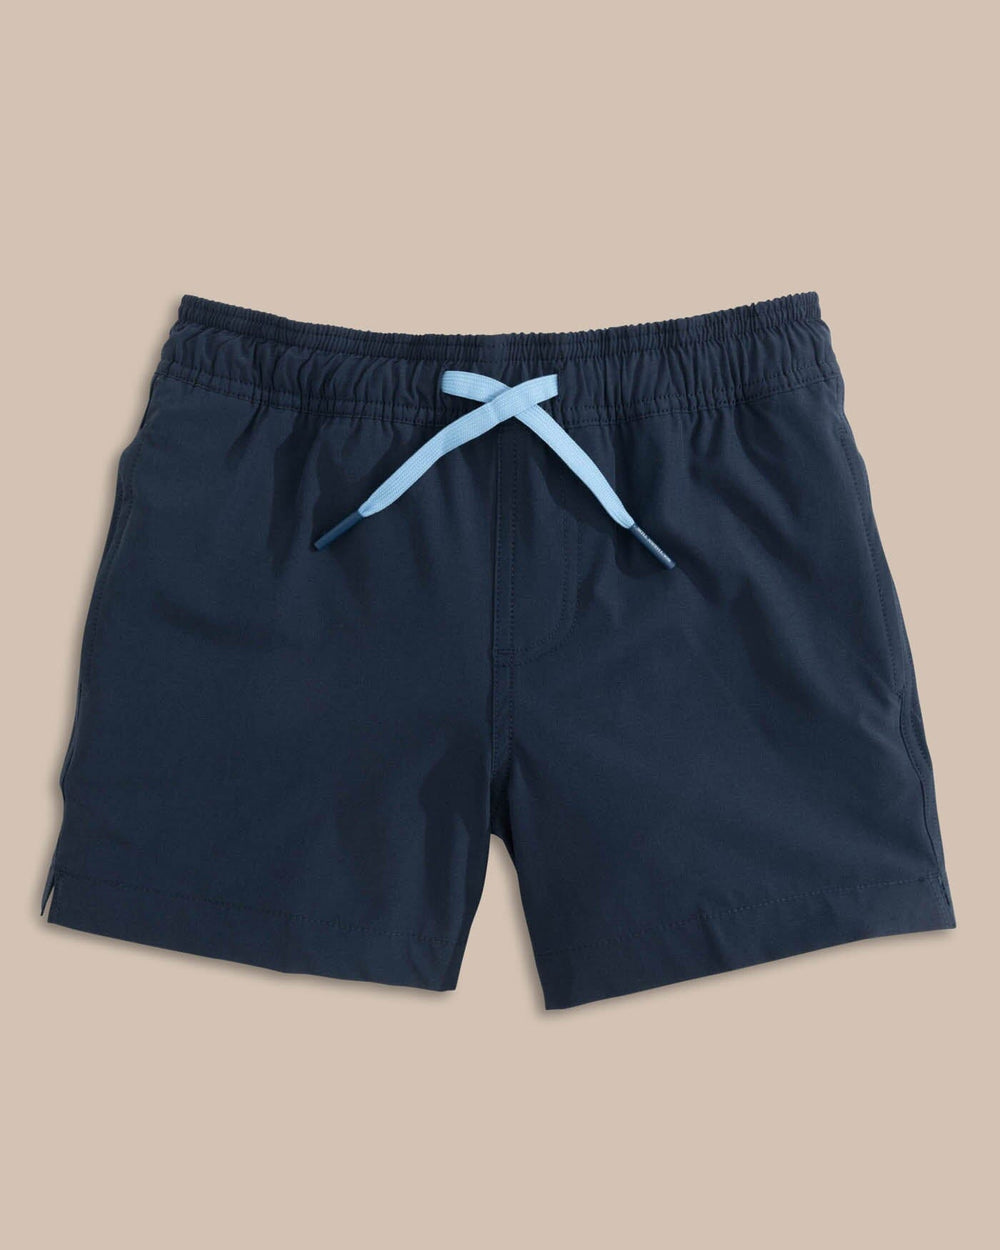 The front view of the Southern Tide Boys Solid Swim Truck 2 0 by Southern Tide - True Navy